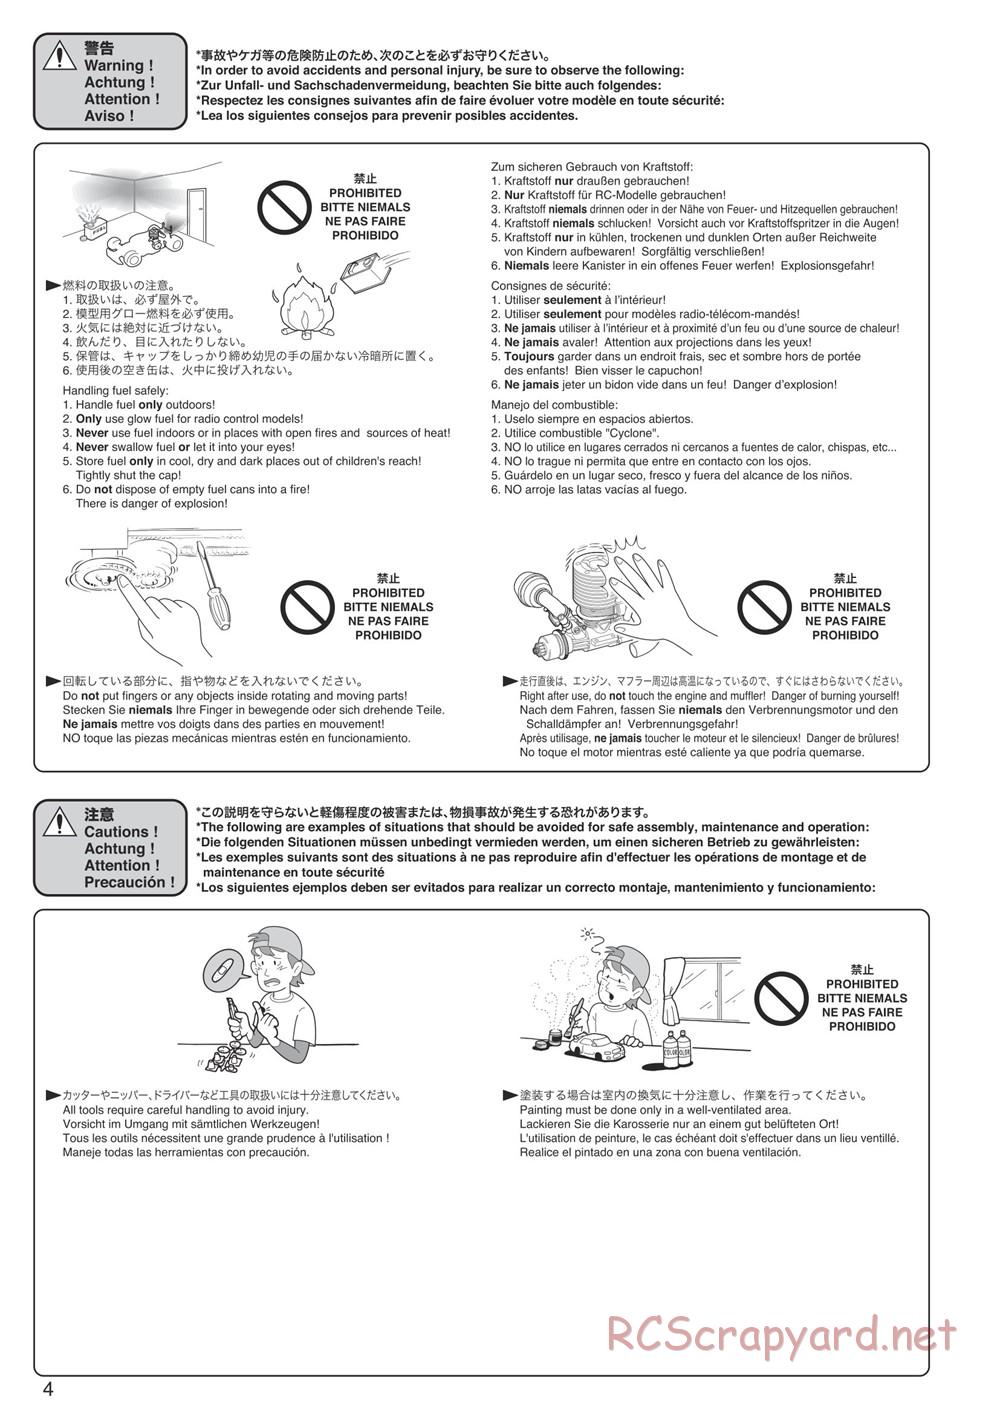 Kyosho - DMT - Manual - Page 4